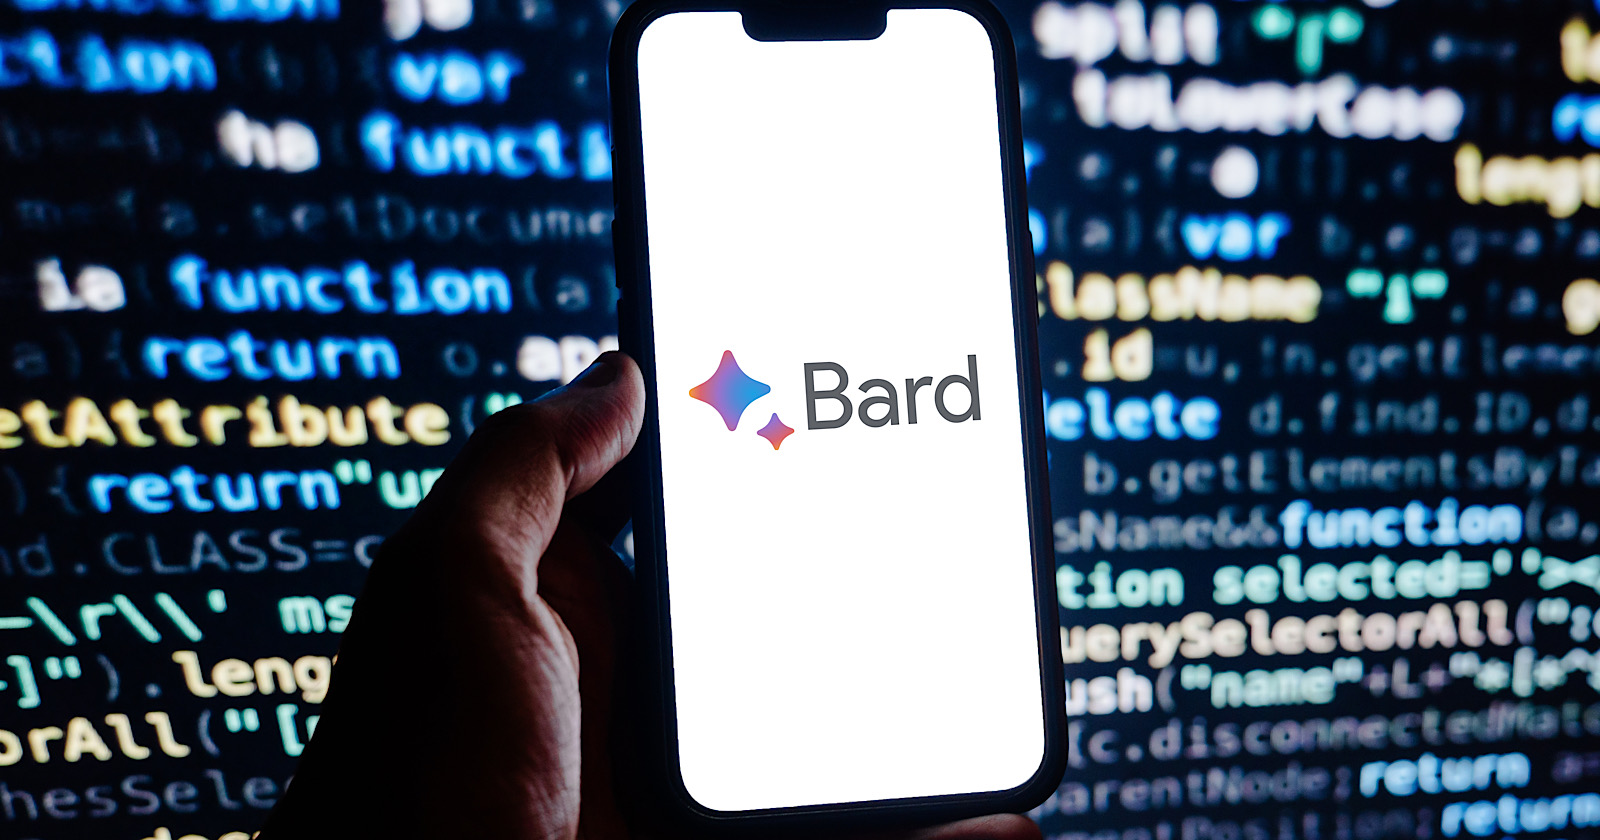 Google Indexing Bard Conversations In Search Results